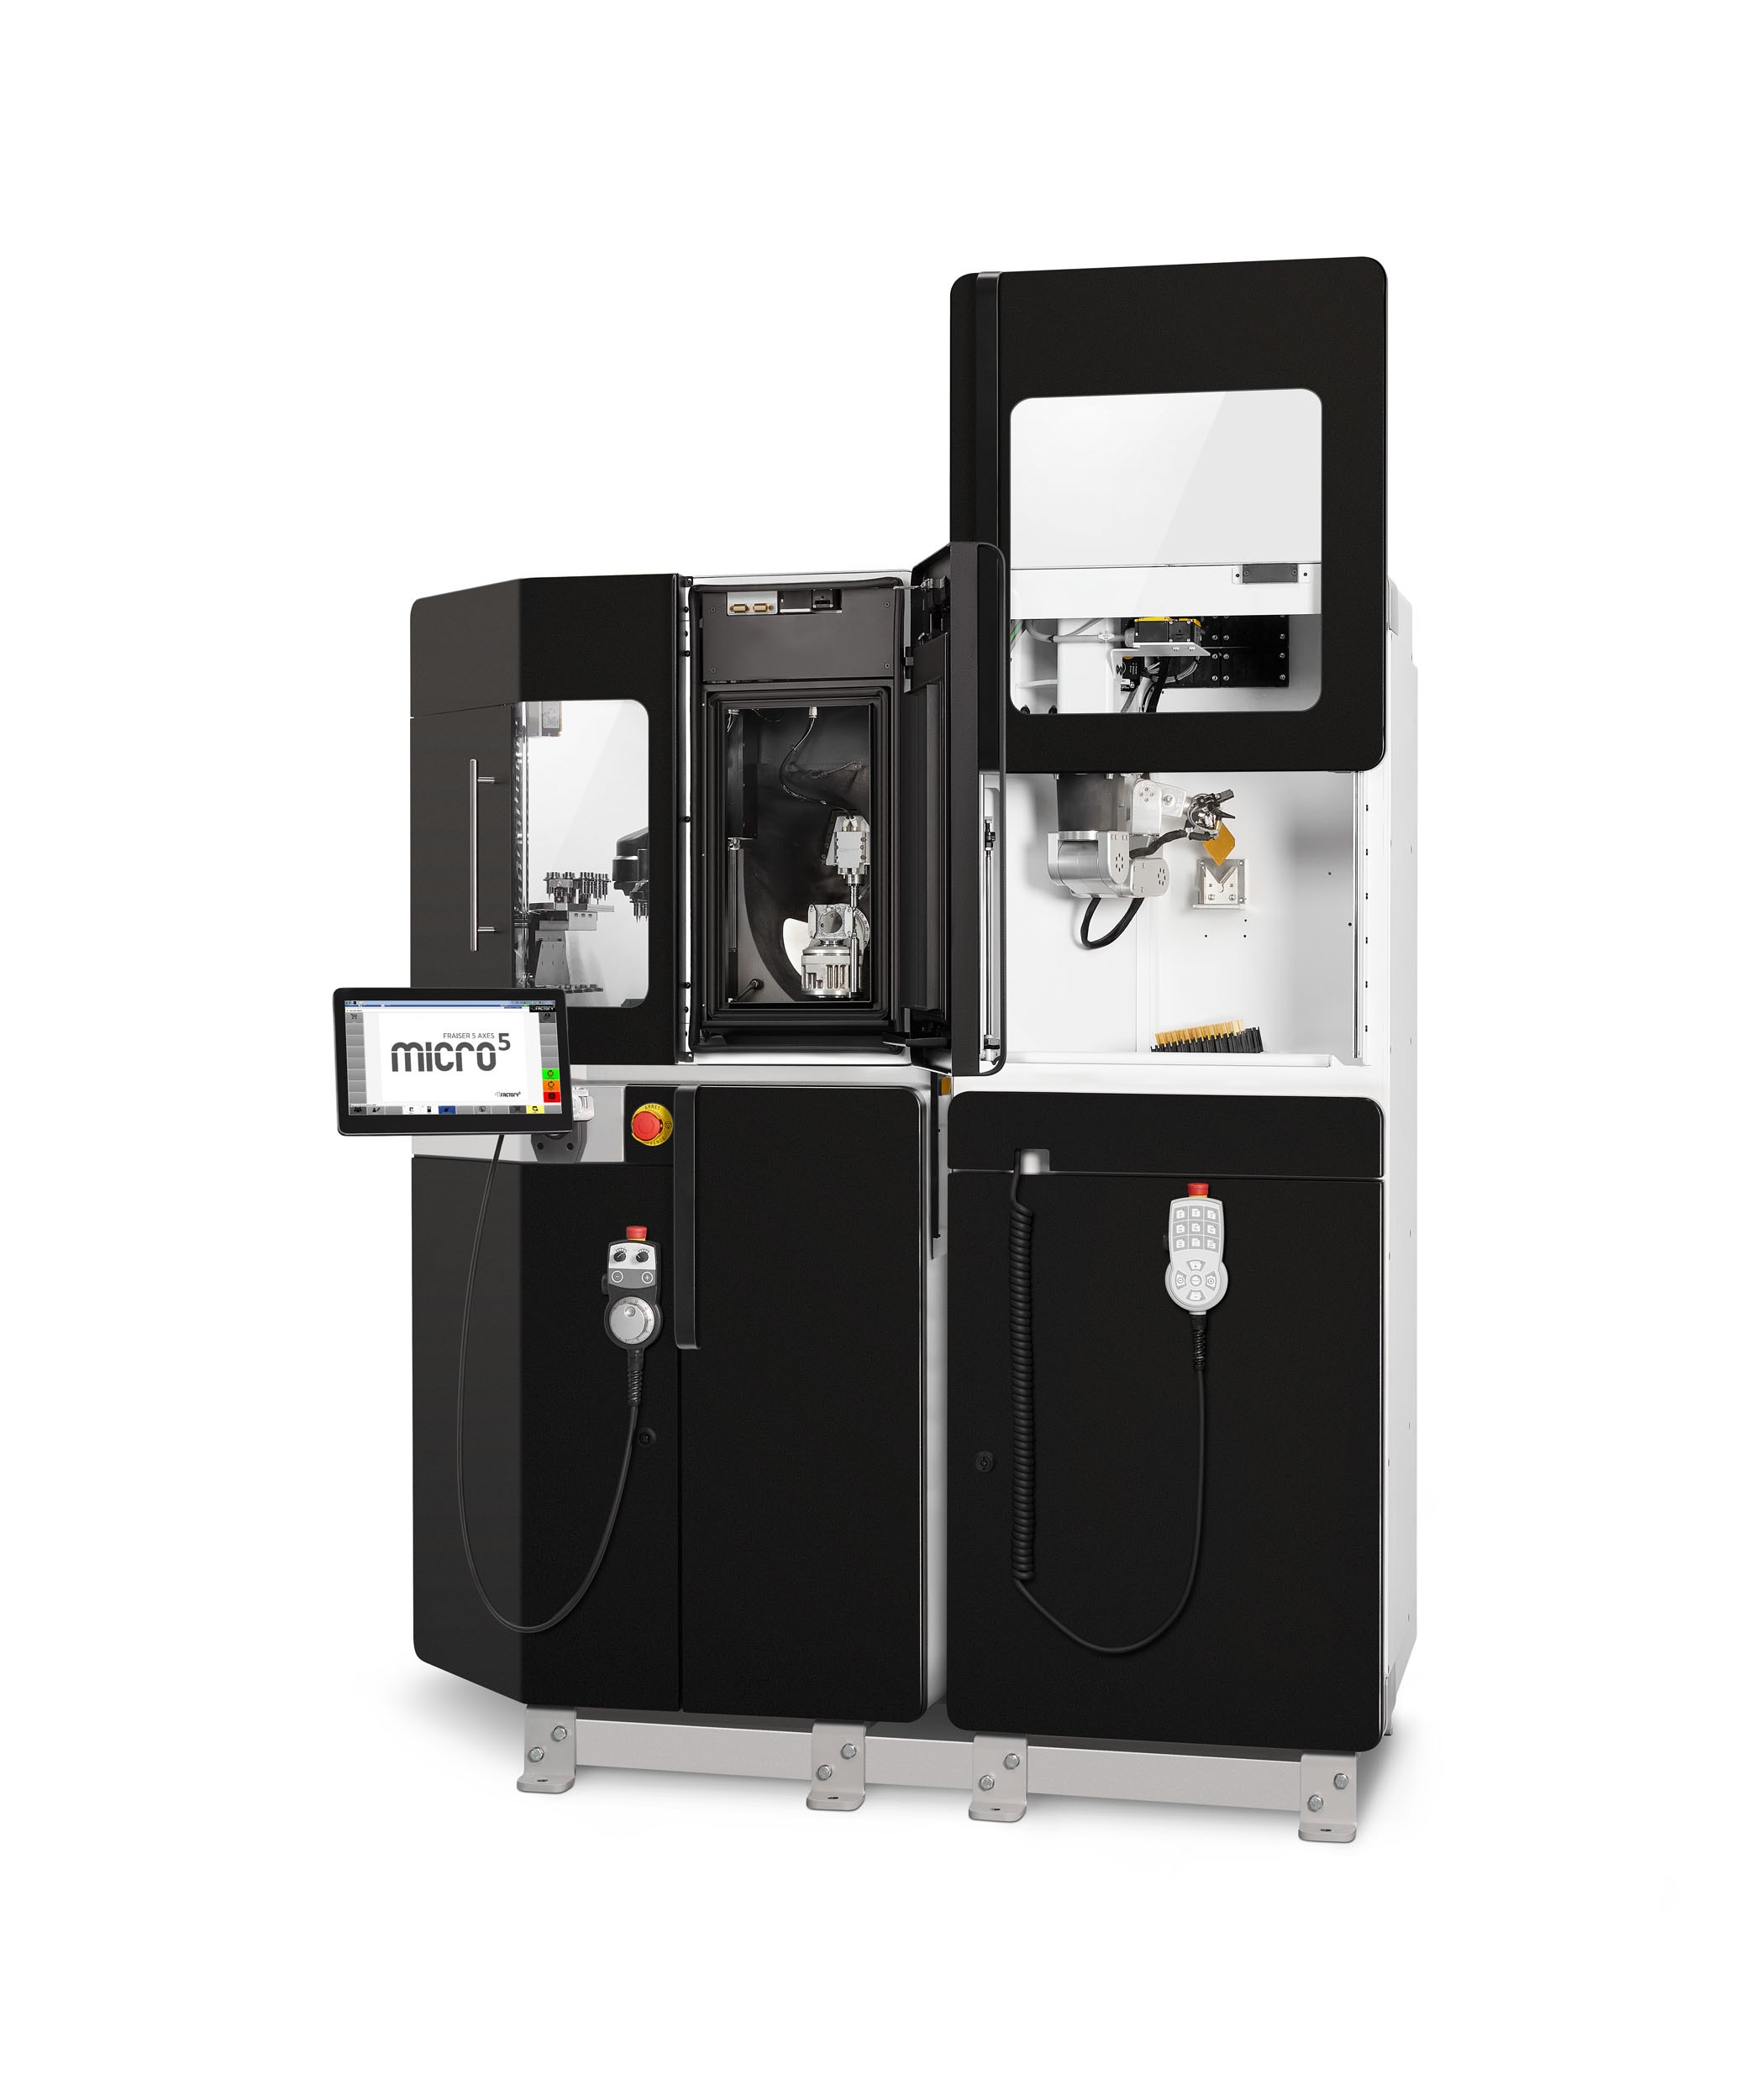 For high-precision and sustainable manufacturing in microtechnology – a scalable manufacturing system for prototypes, pre-series and large-scale production: Micro5 and Feed5.